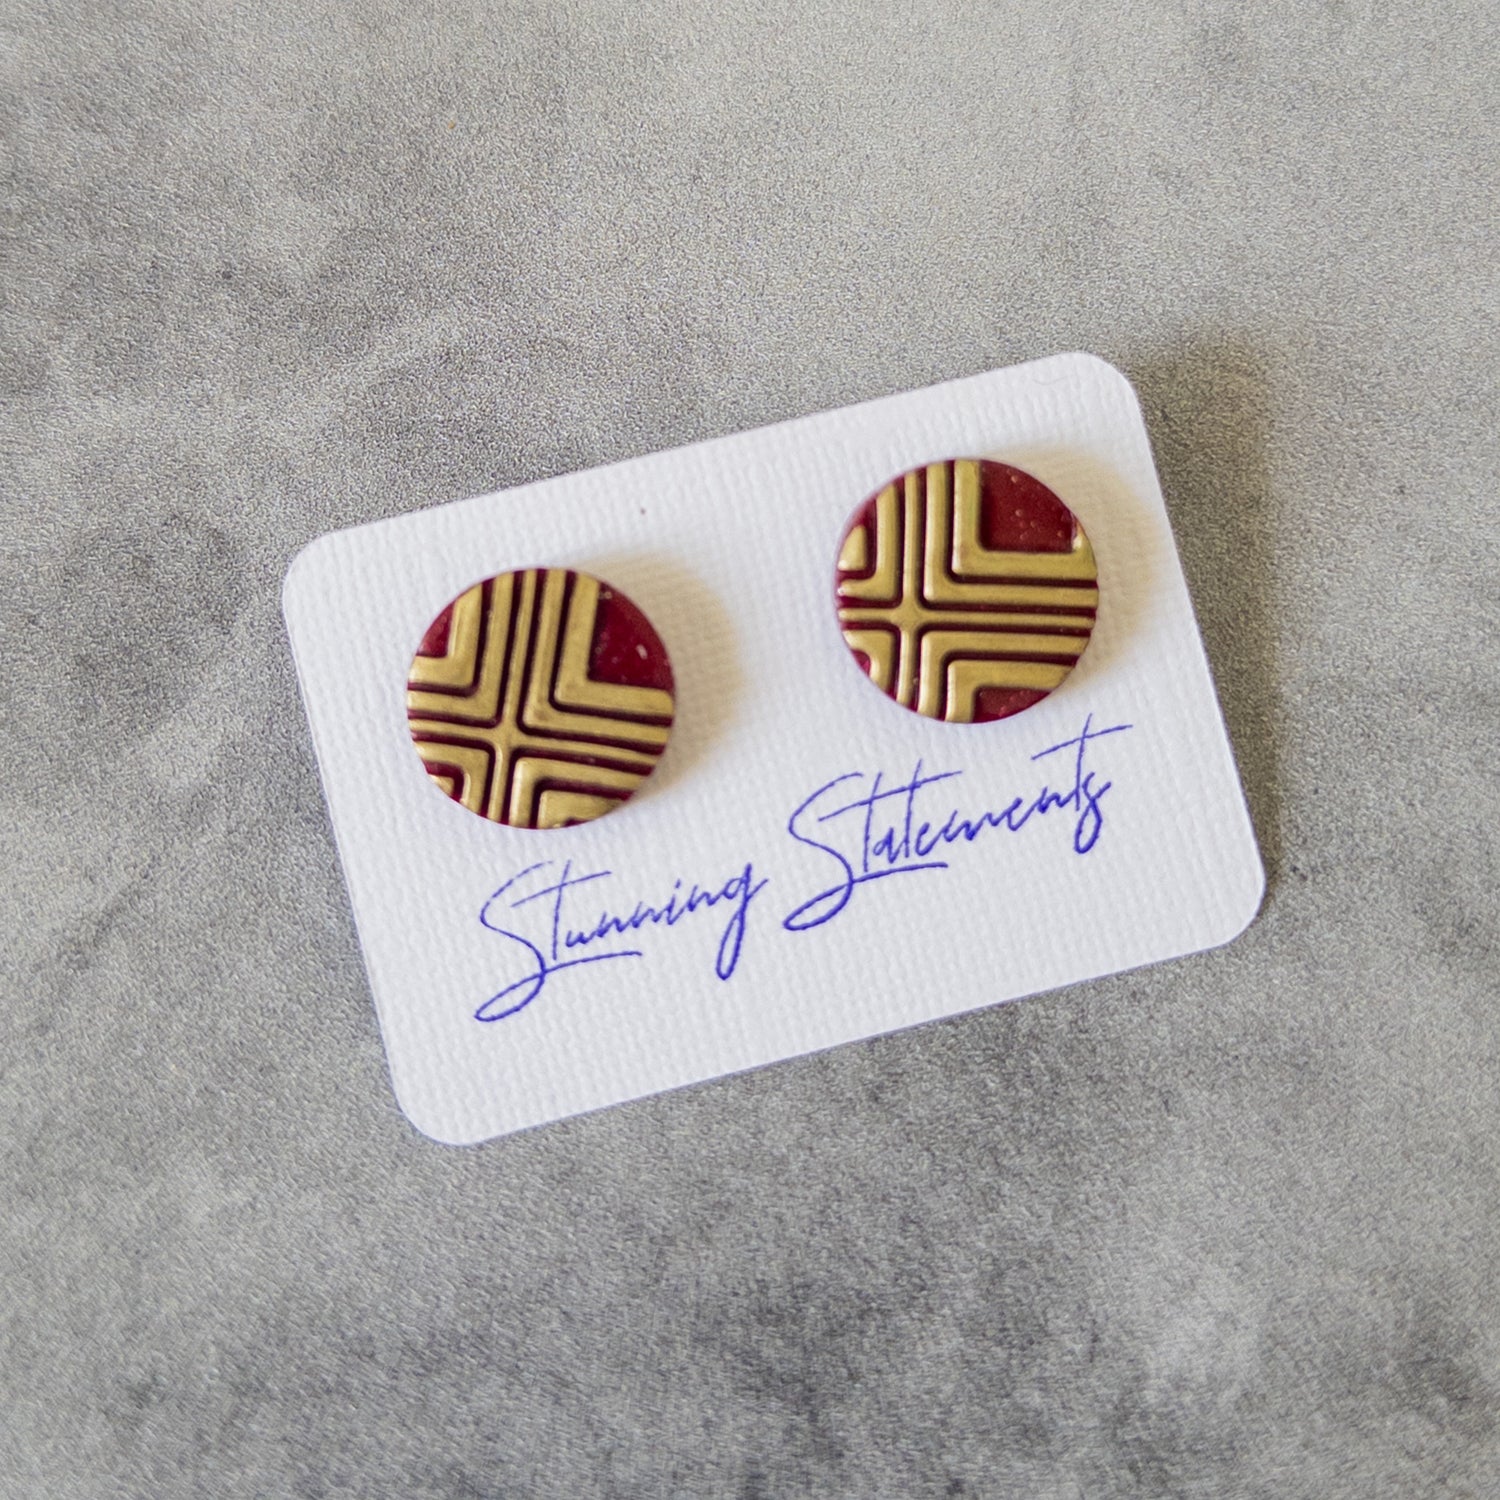 stunning statements textured bright bold colorful maroon burgundy cleo stud earrings